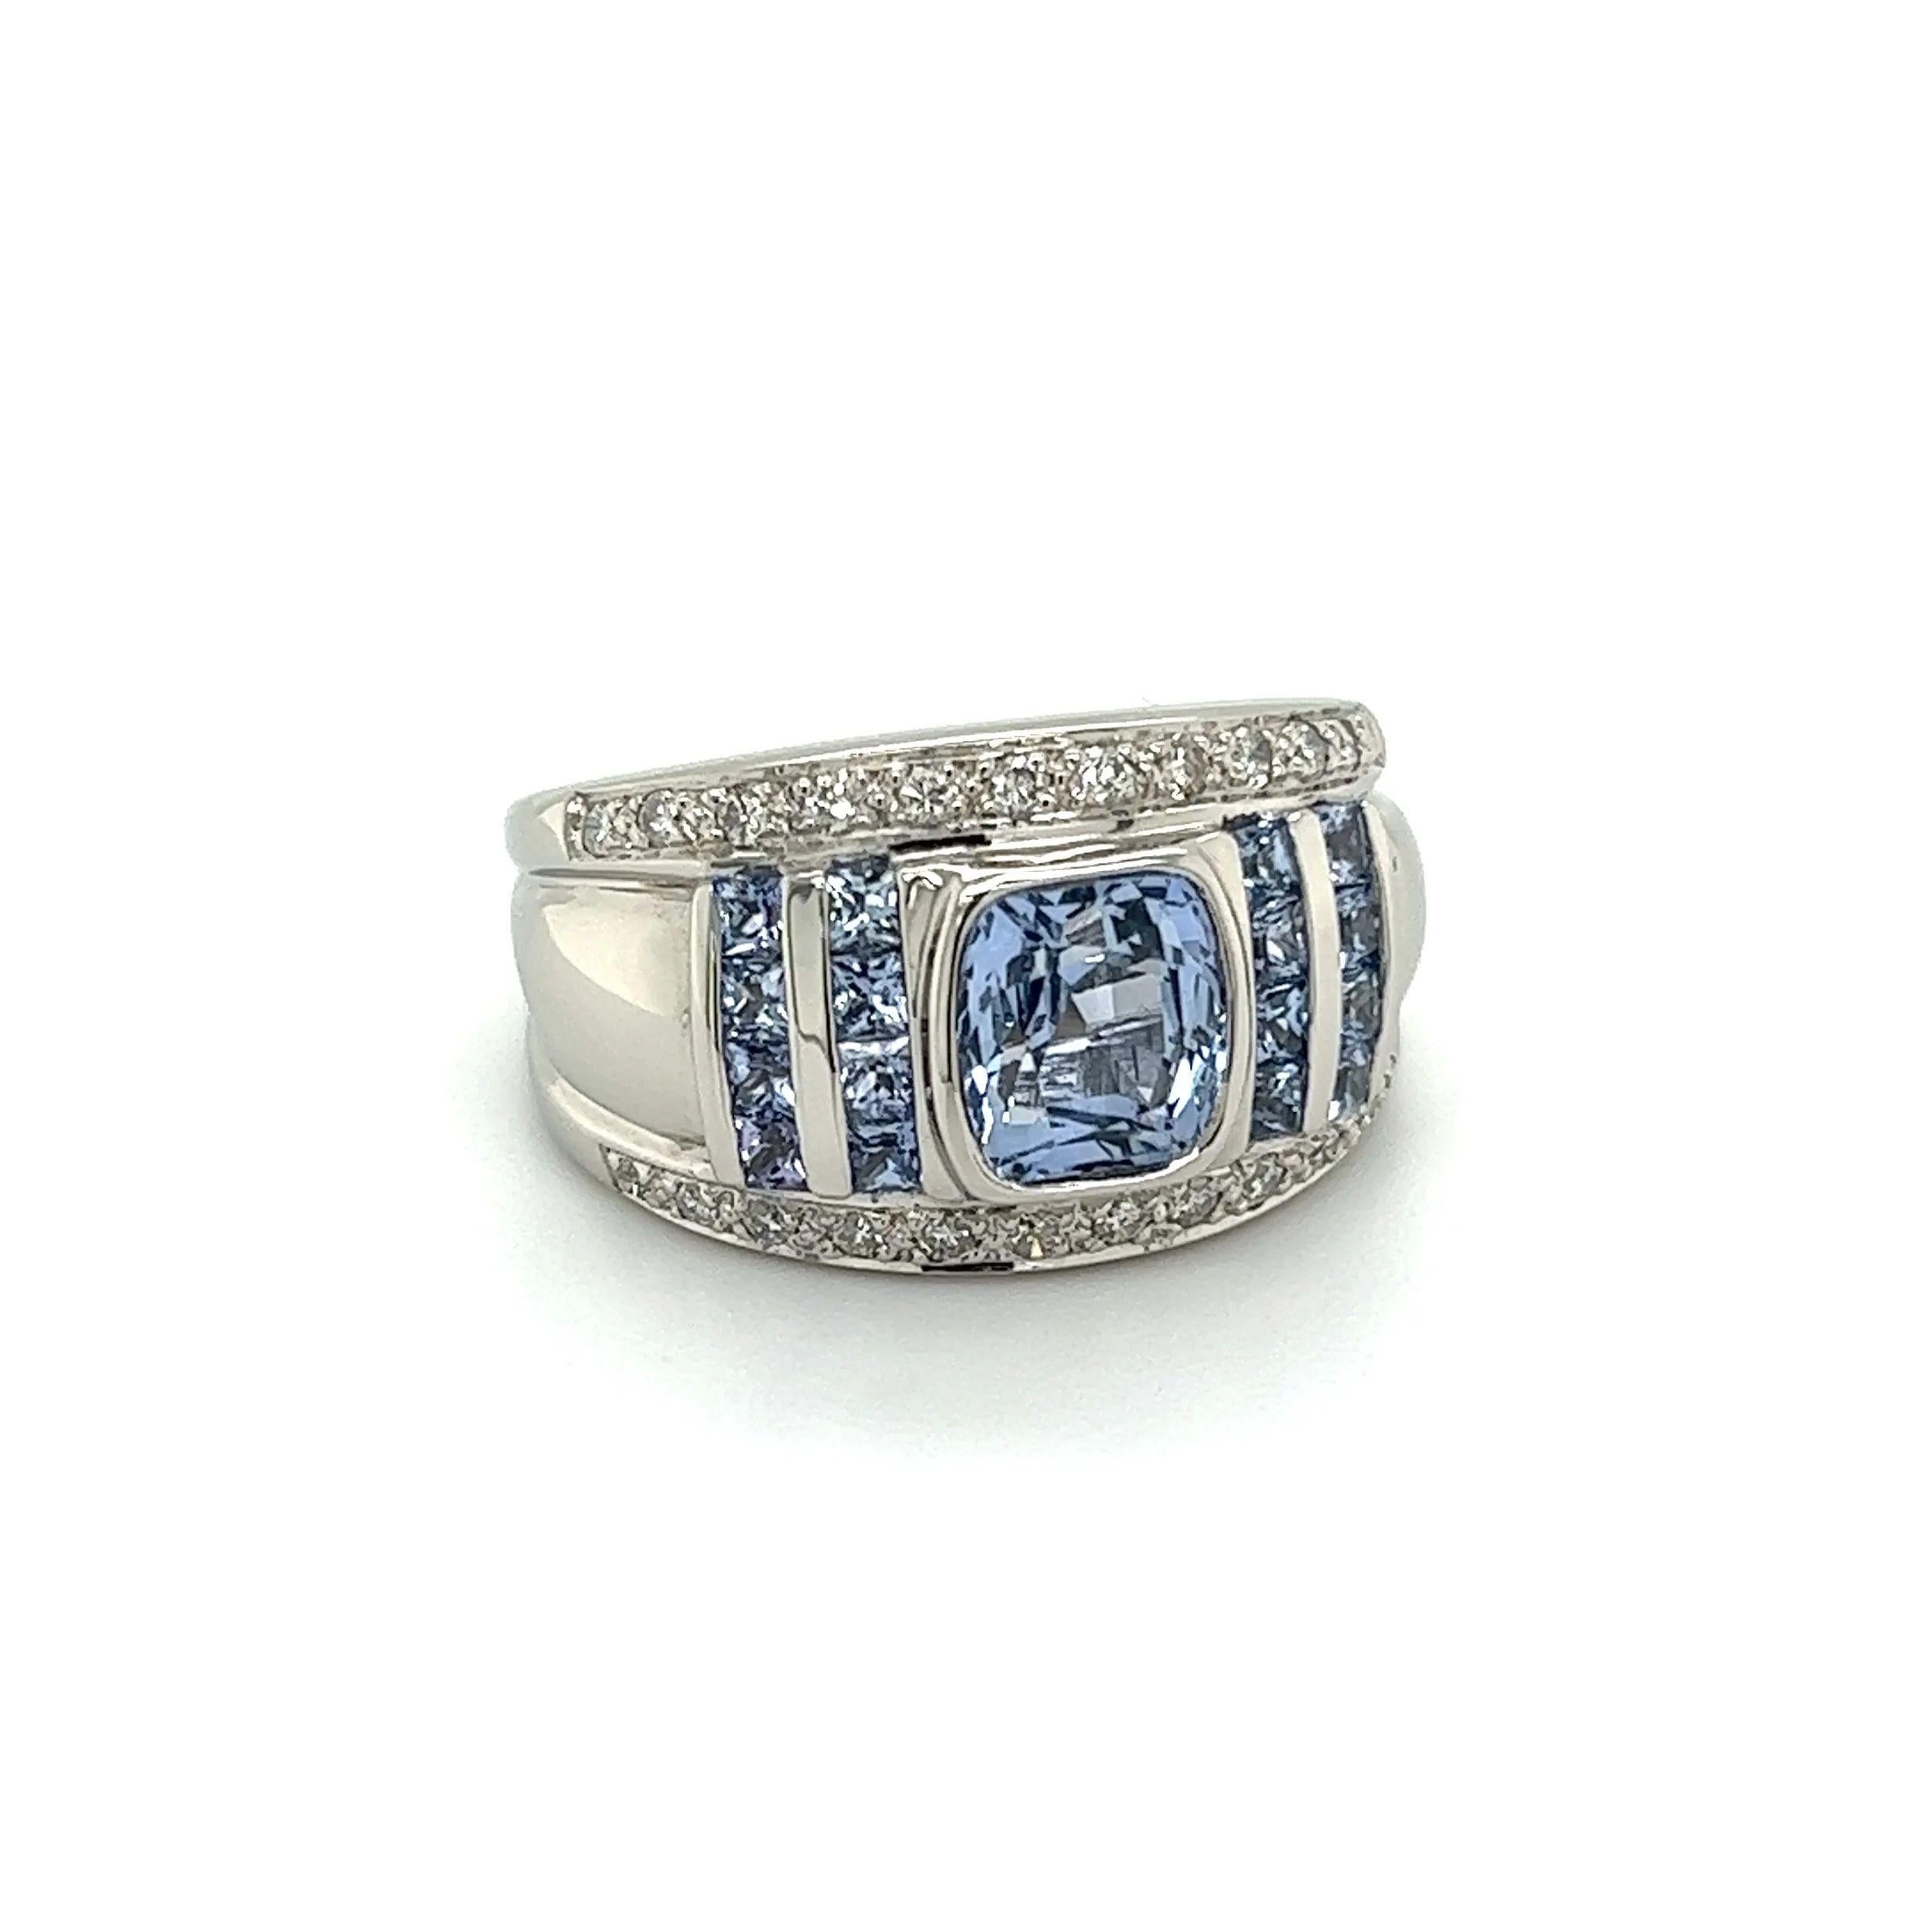 Simply Beautiful! Diamond and Sapphire Platinum 12.5mm Vintage Dome Band Ring. Centering a securely Hand set Cushion Blue Sapphire, weighing approx. 1.91 Carats. Artfully surrounded by 0.73tcw Sapphires and 0.28tcw Diamonds. Hand crafted Platinum